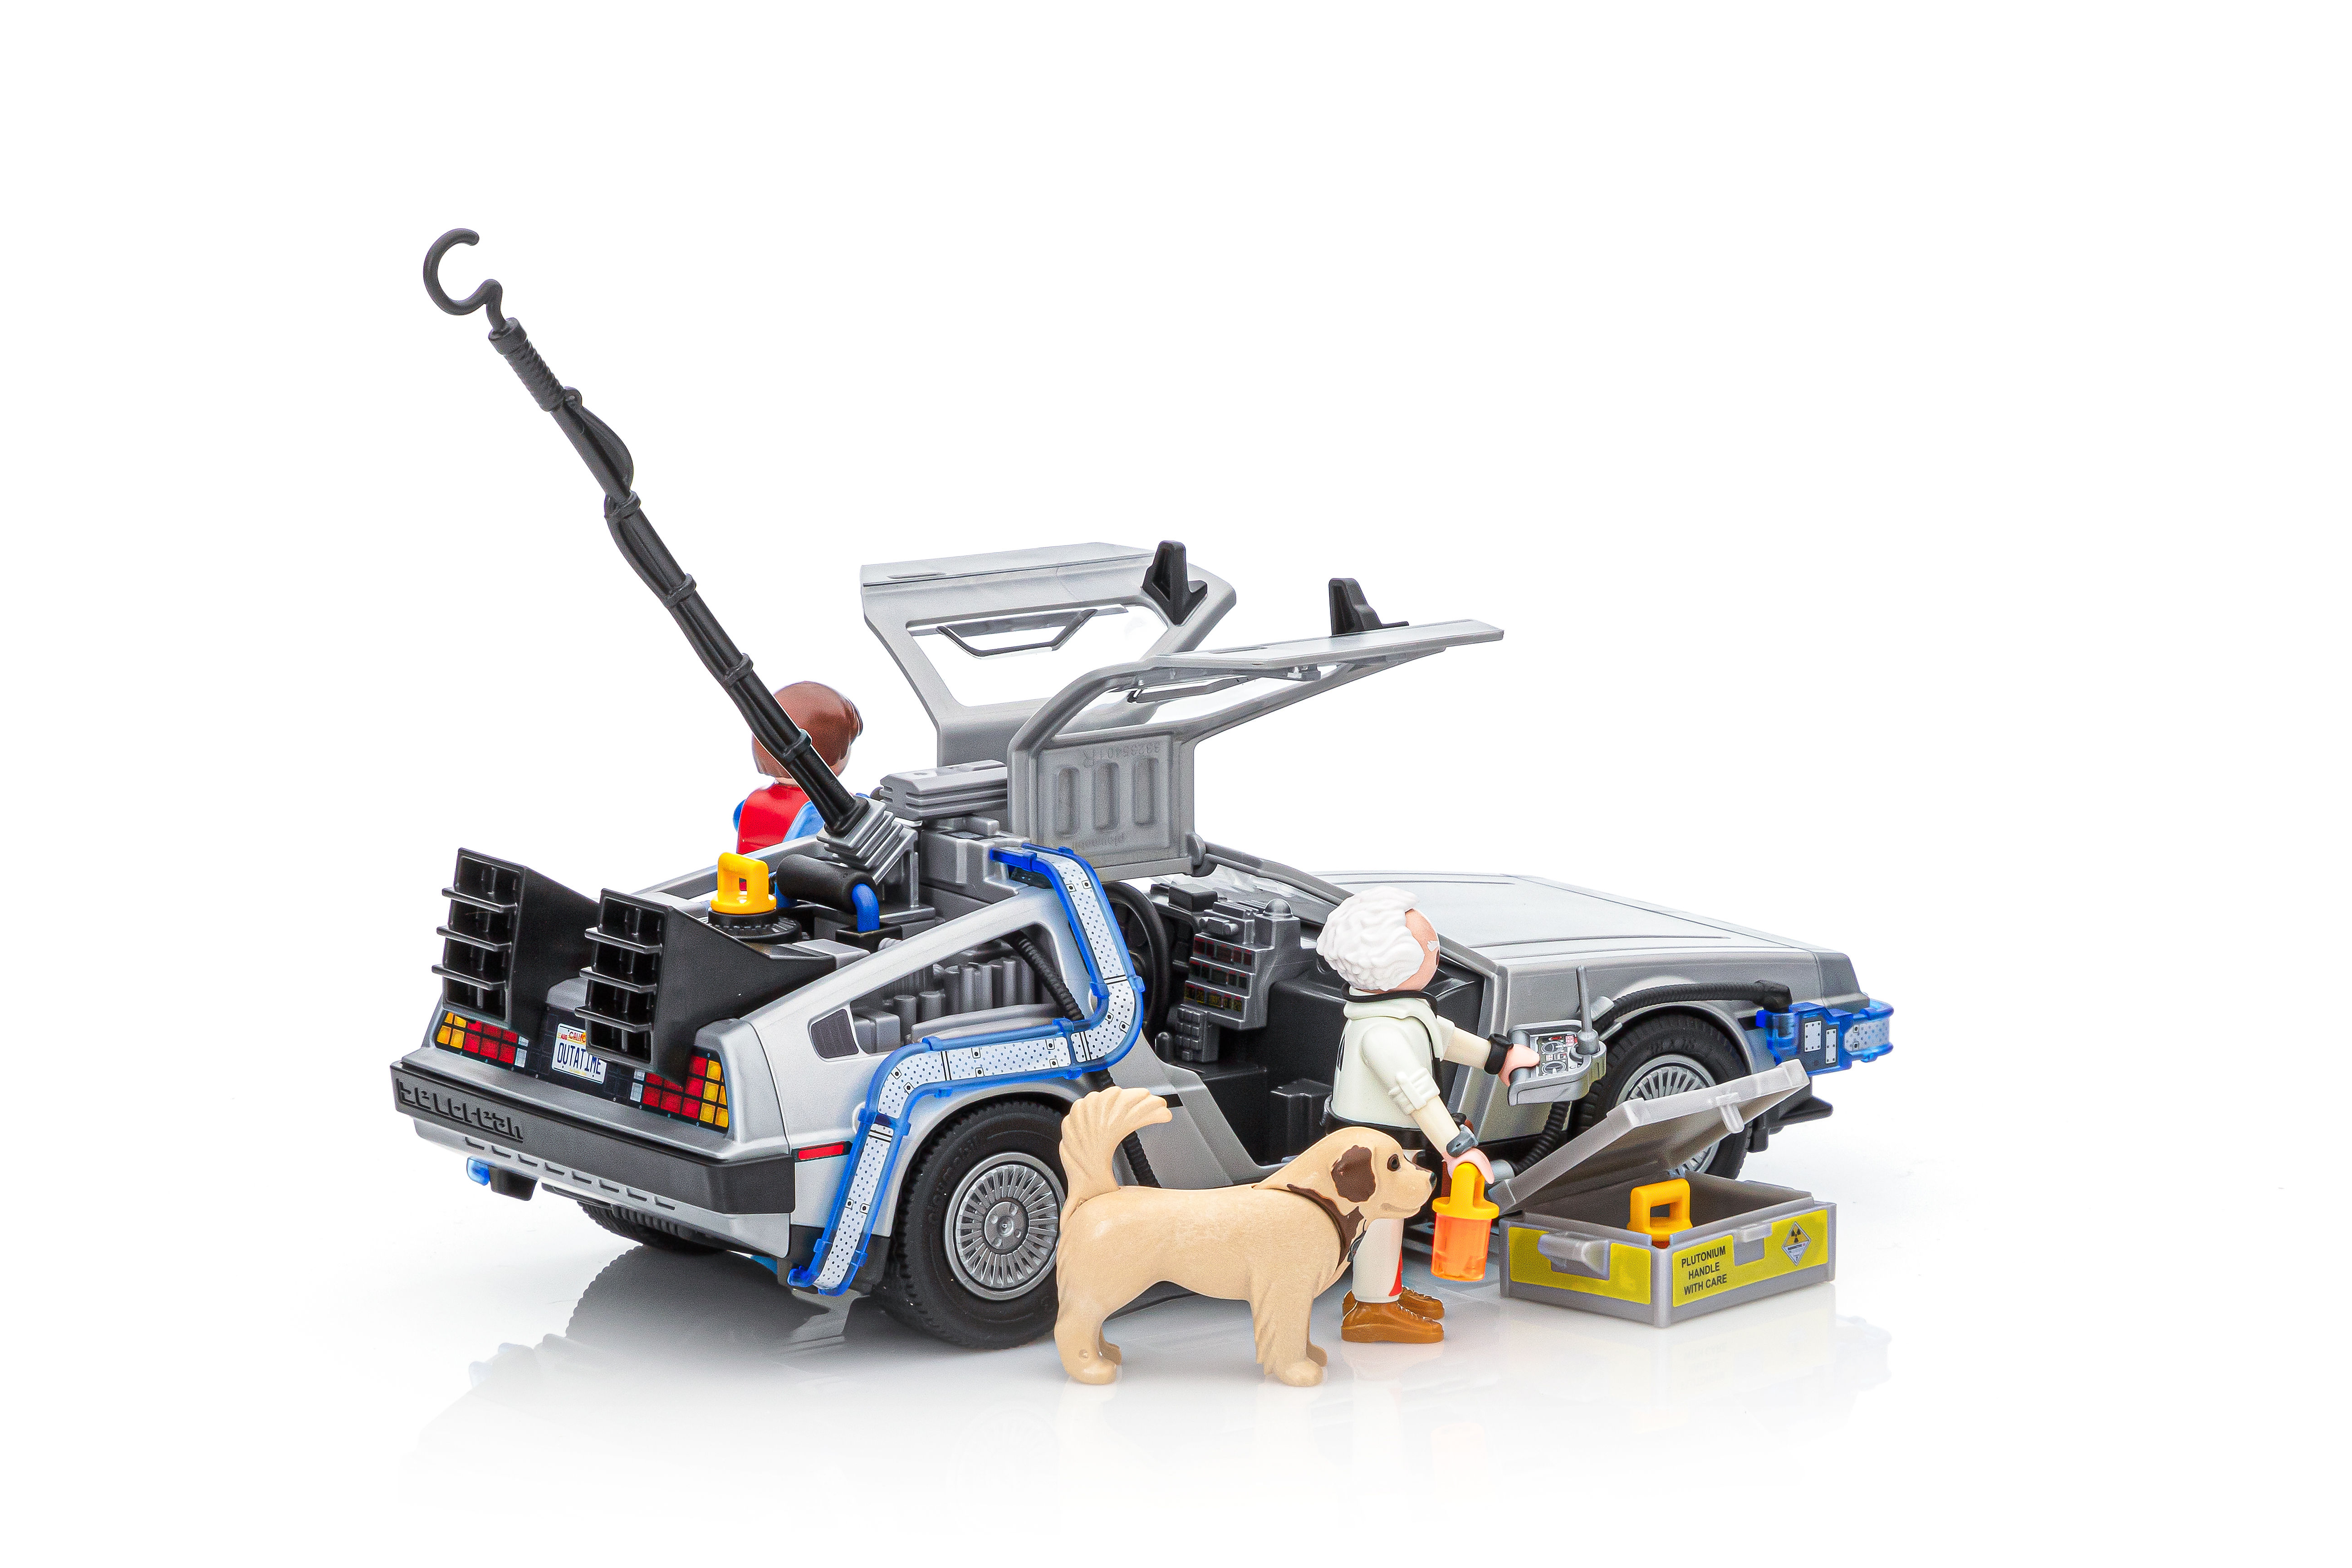 Playmobil Back to the Future DeLorean Vehicle Playset 700317